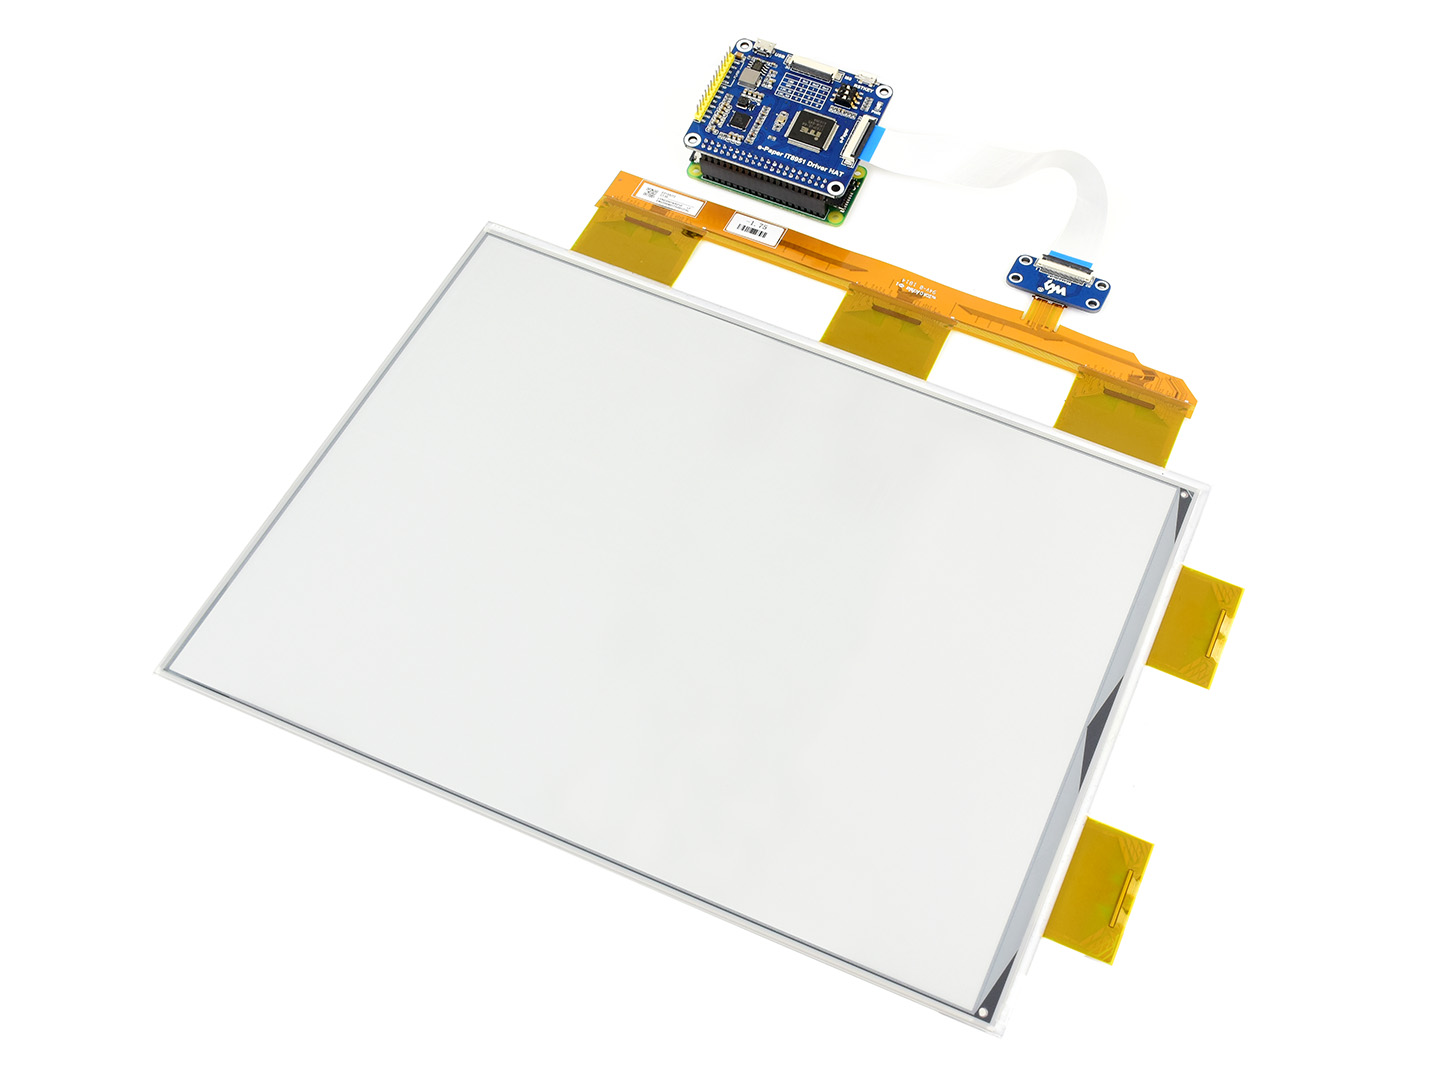 13.3inch e-Paper e-Ink Display HAT For Raspberry Pi, 1600*1200, Black / White, 16 Grey Scales, USB /